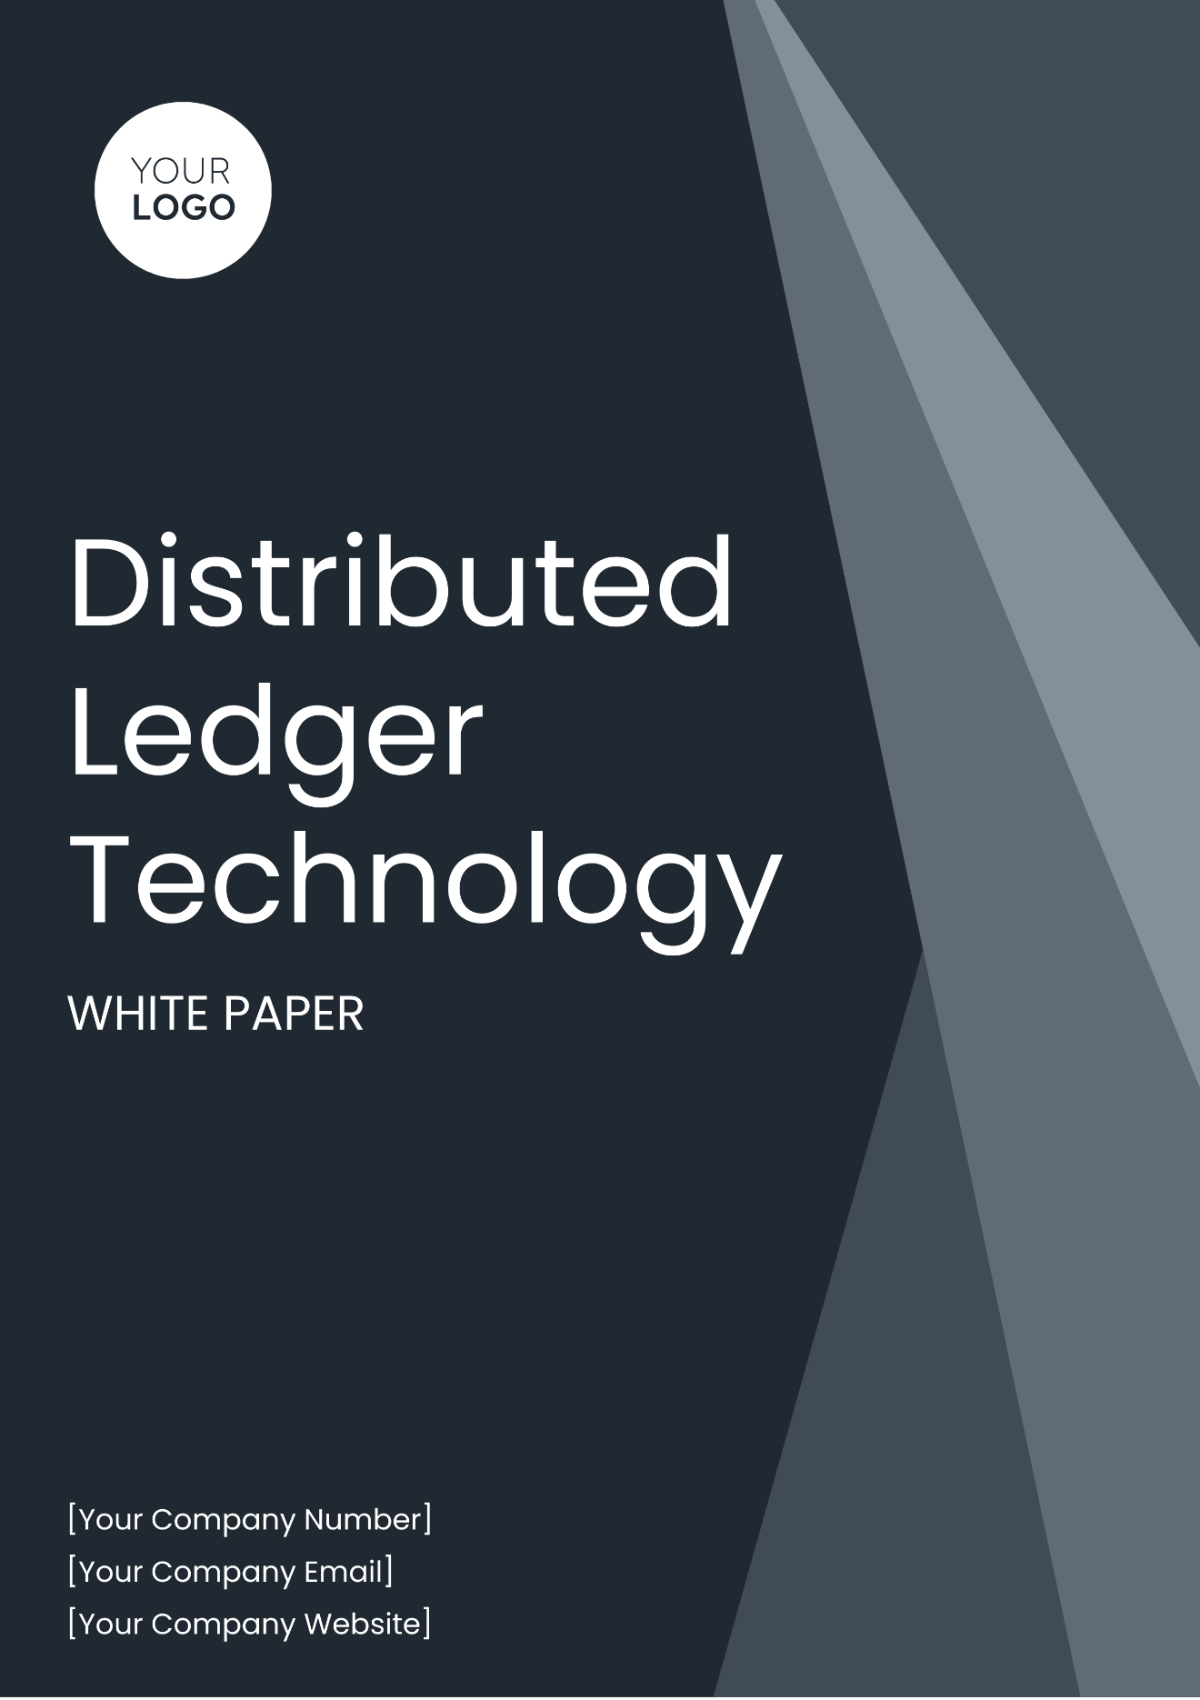 Free White Paper on Distributed Ledger Technology Template